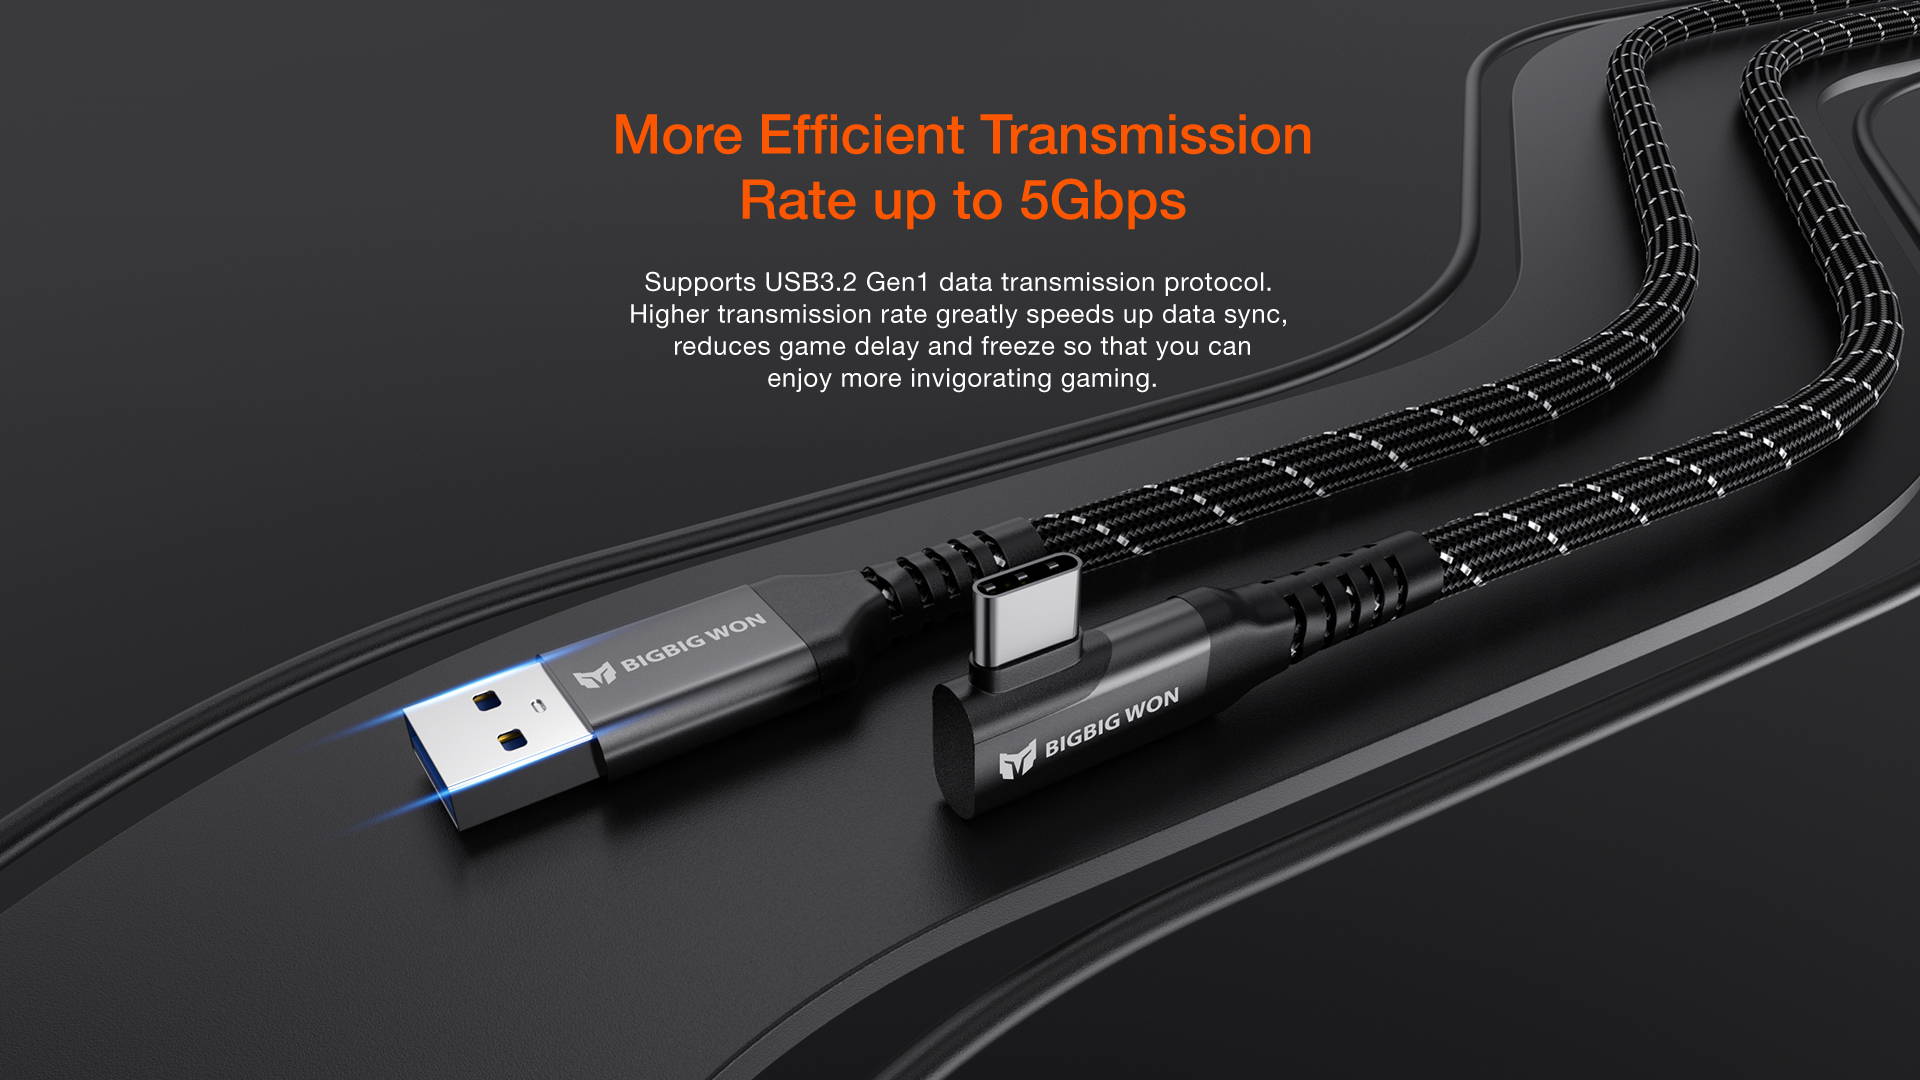 bigbig won usb c type c link cable usb 3.2 gen 1 data transmission protocol for up to 5 gbps rate